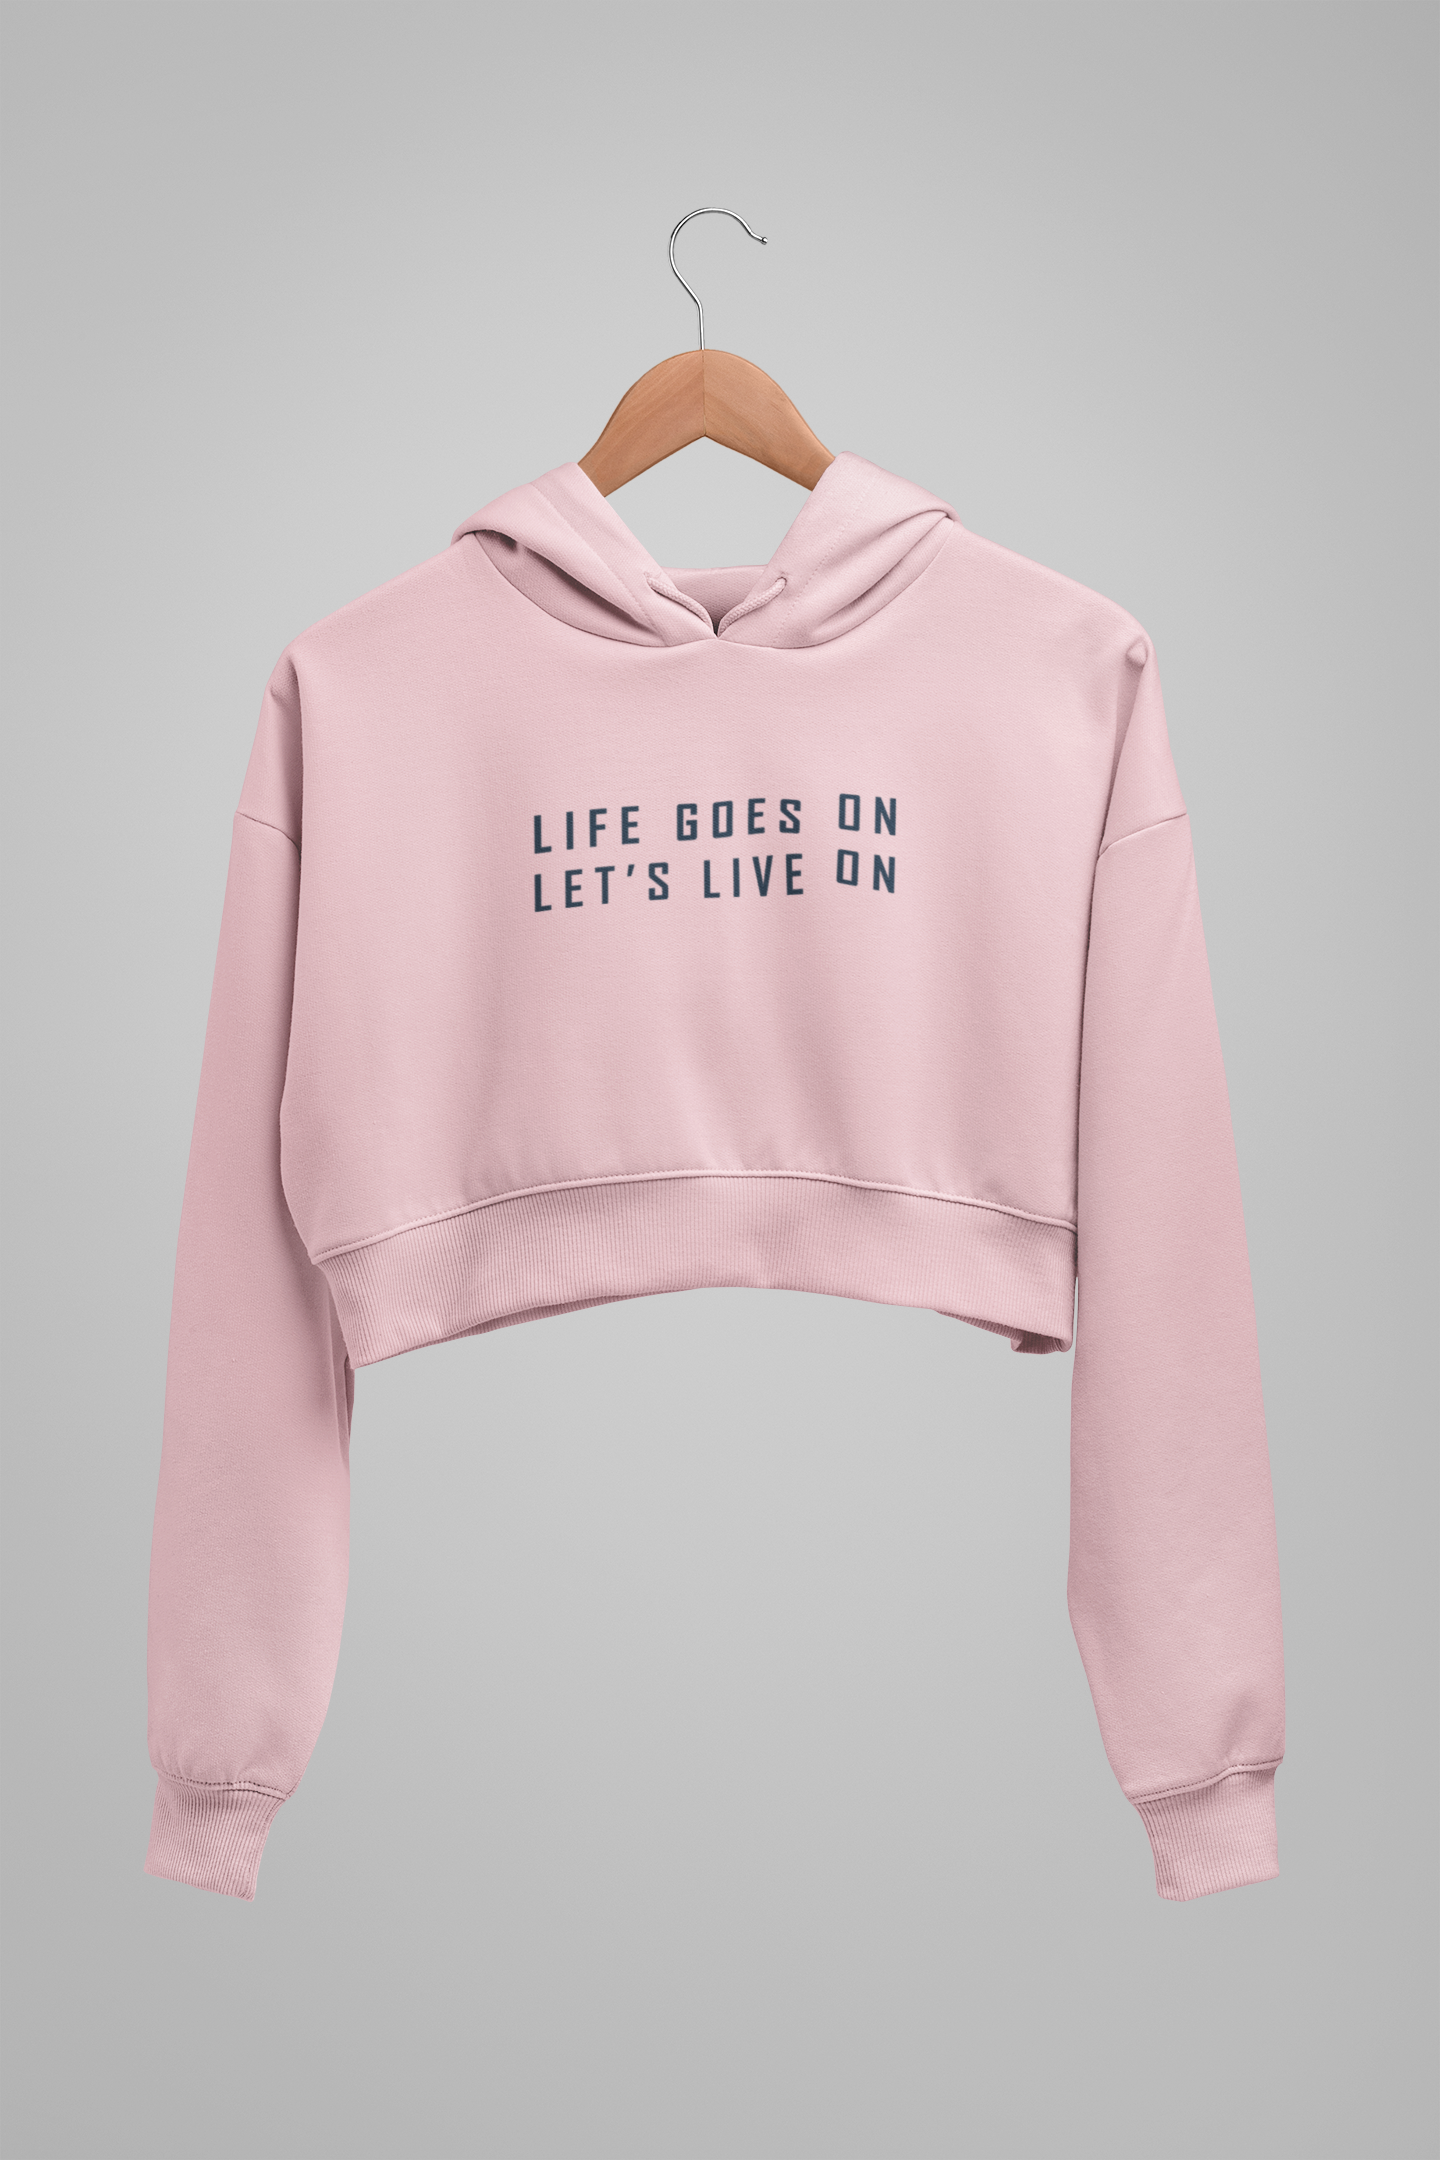 Life Goes On, Let's Live On : BTS - Winter Crop Hoodies